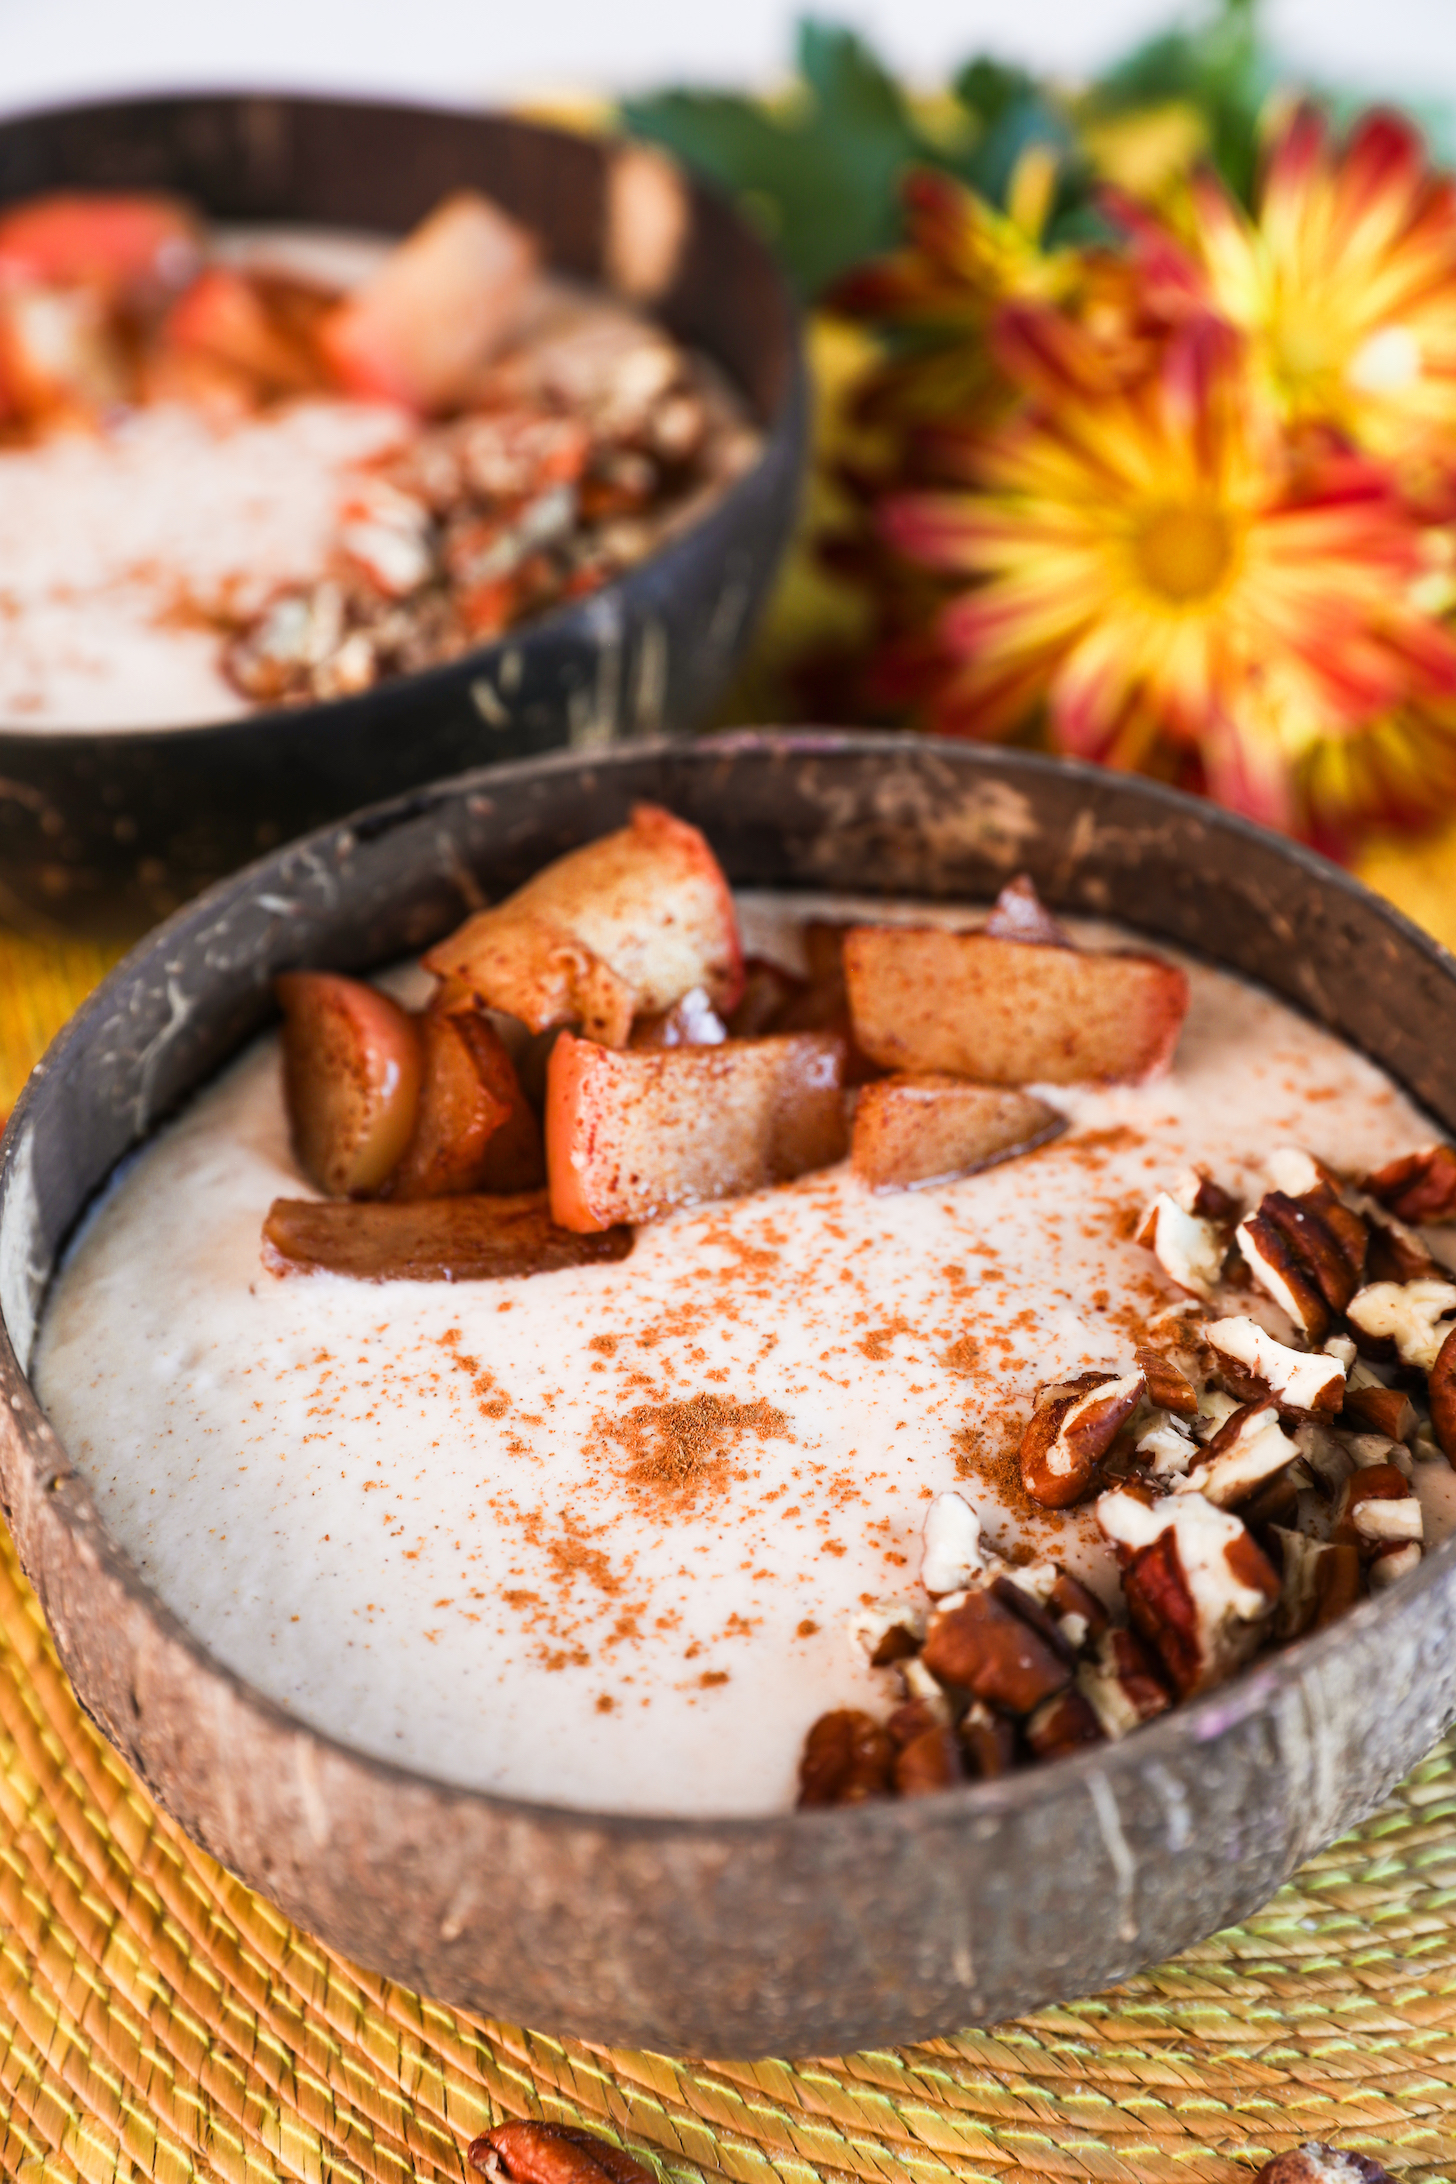 Close up image of two coconut bowls with beige smoothie, garnished with baked apple slices, pecans, and cinnamon, one in focus, the other blurred, with nearby bright yellow flowers.